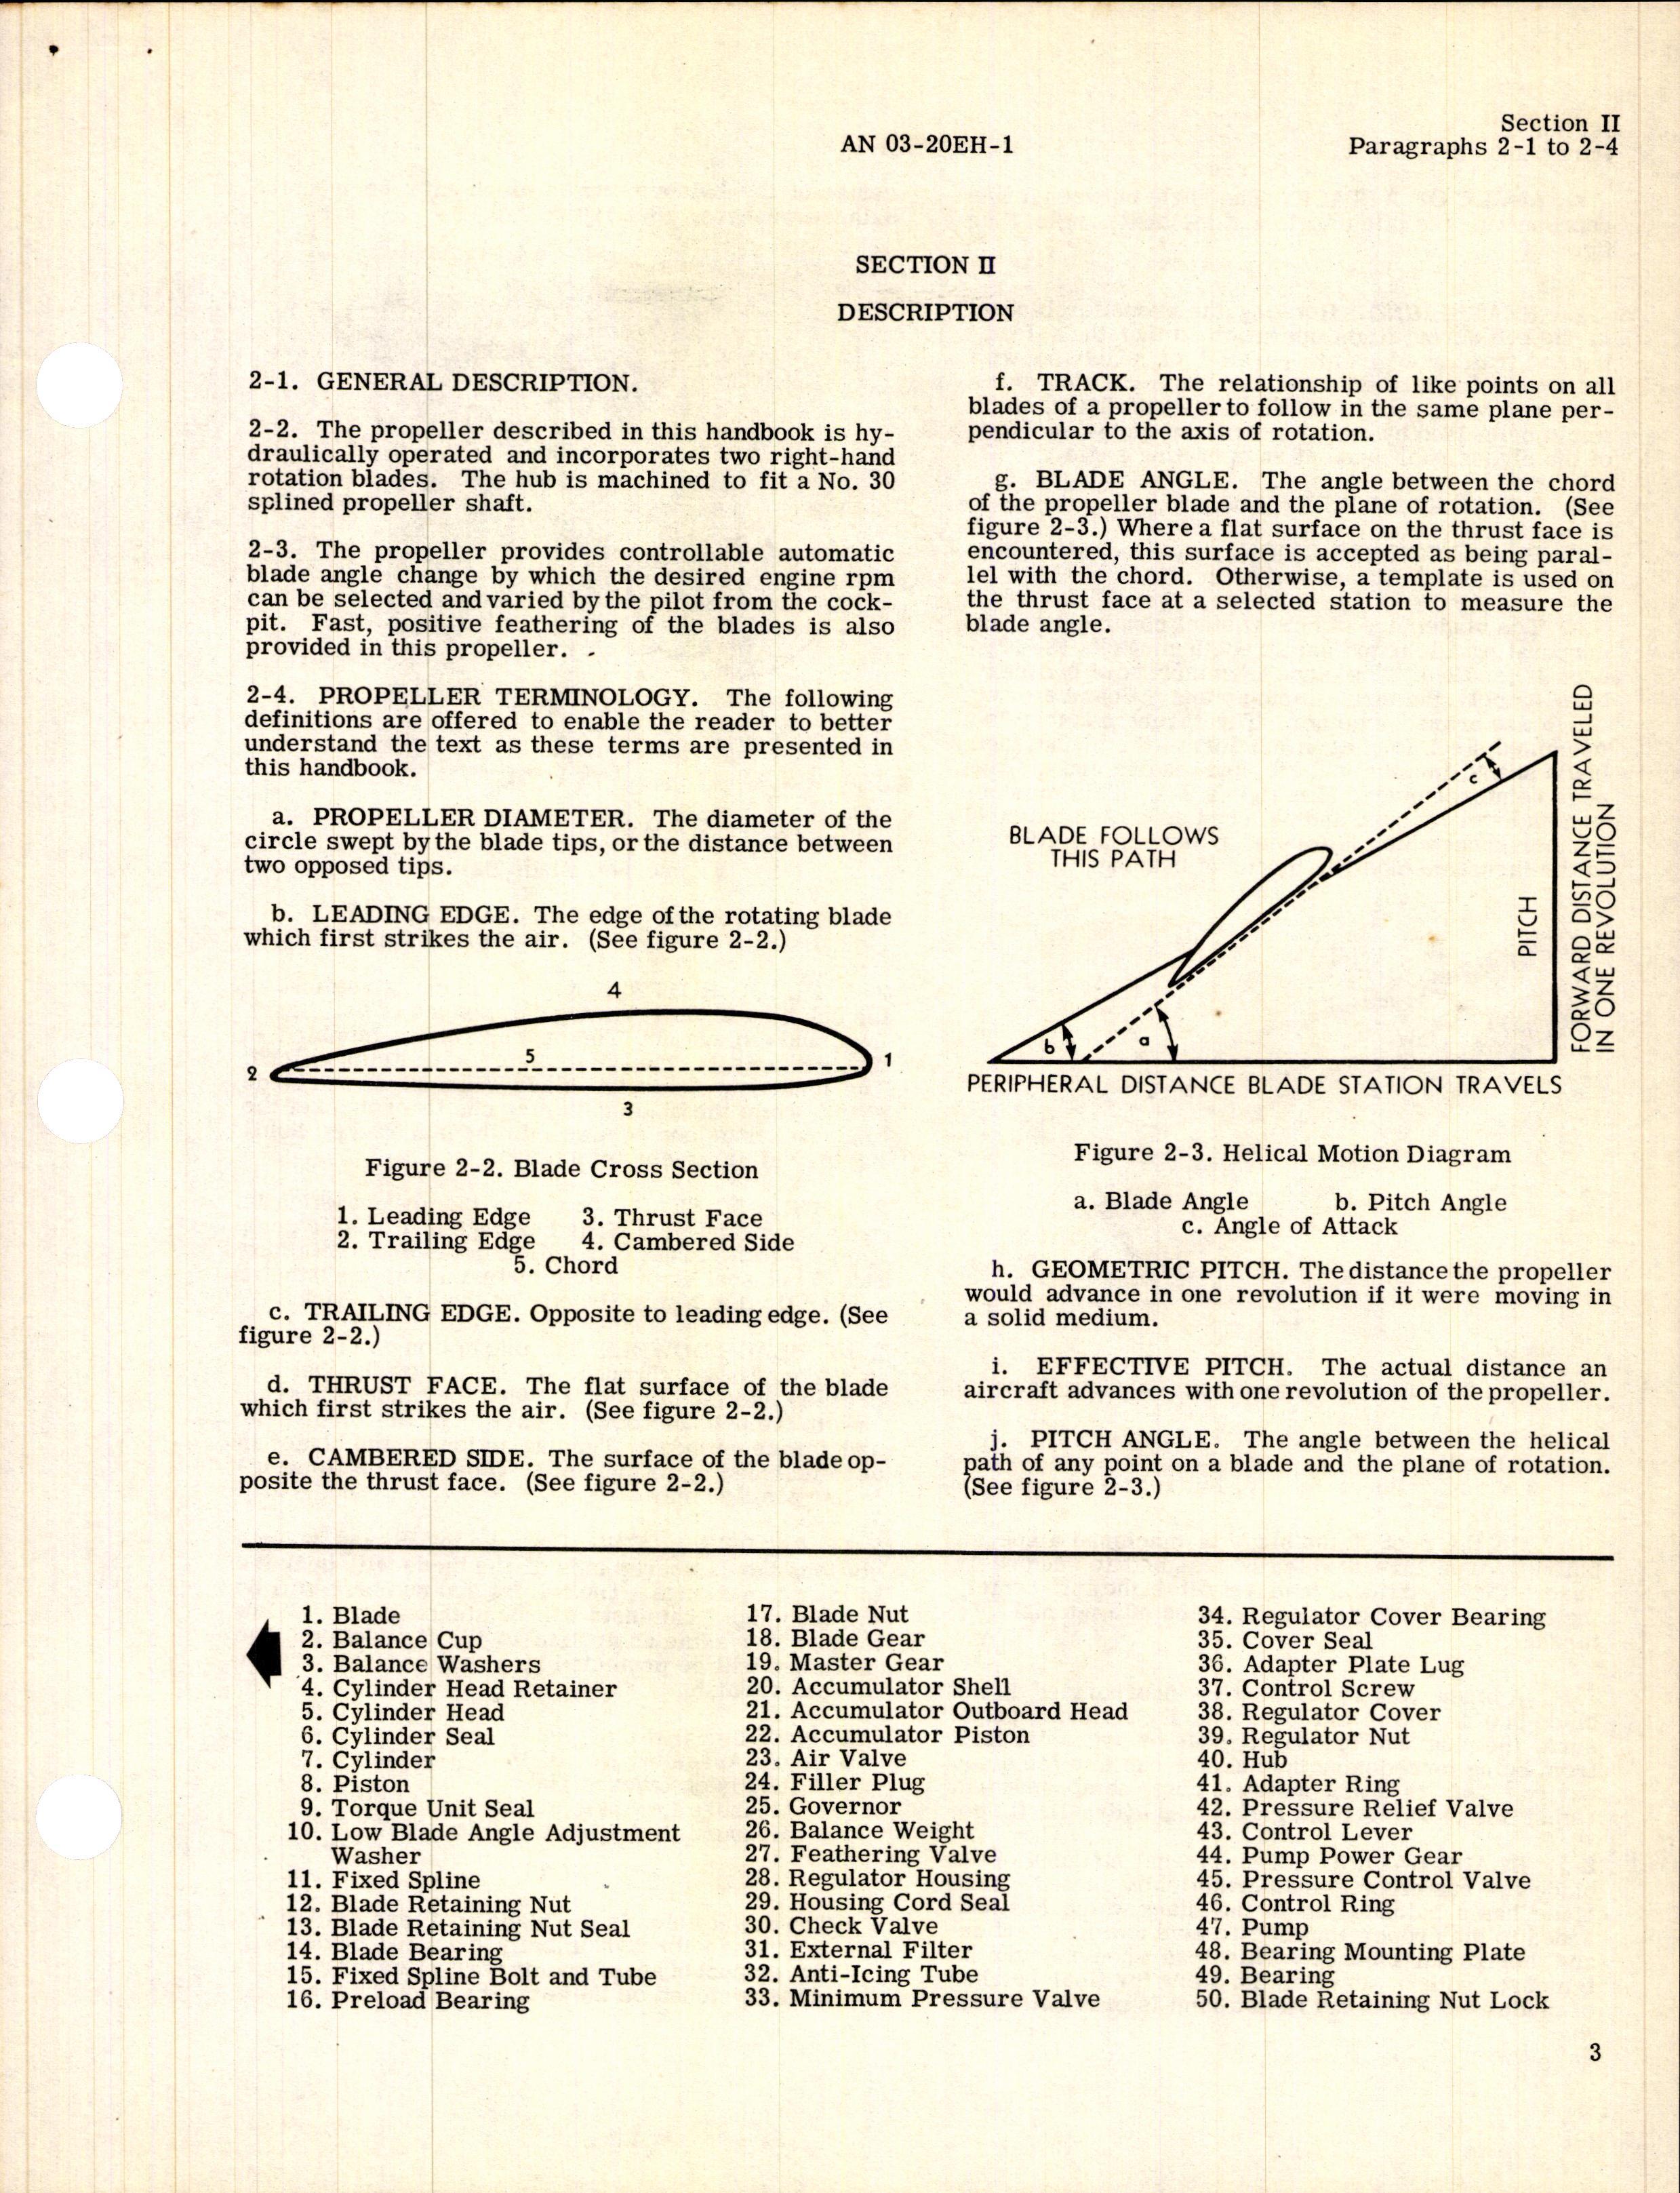 Sample page 7 from AirCorps Library document: Operation and Service Instructions for Hydraulic Propeller